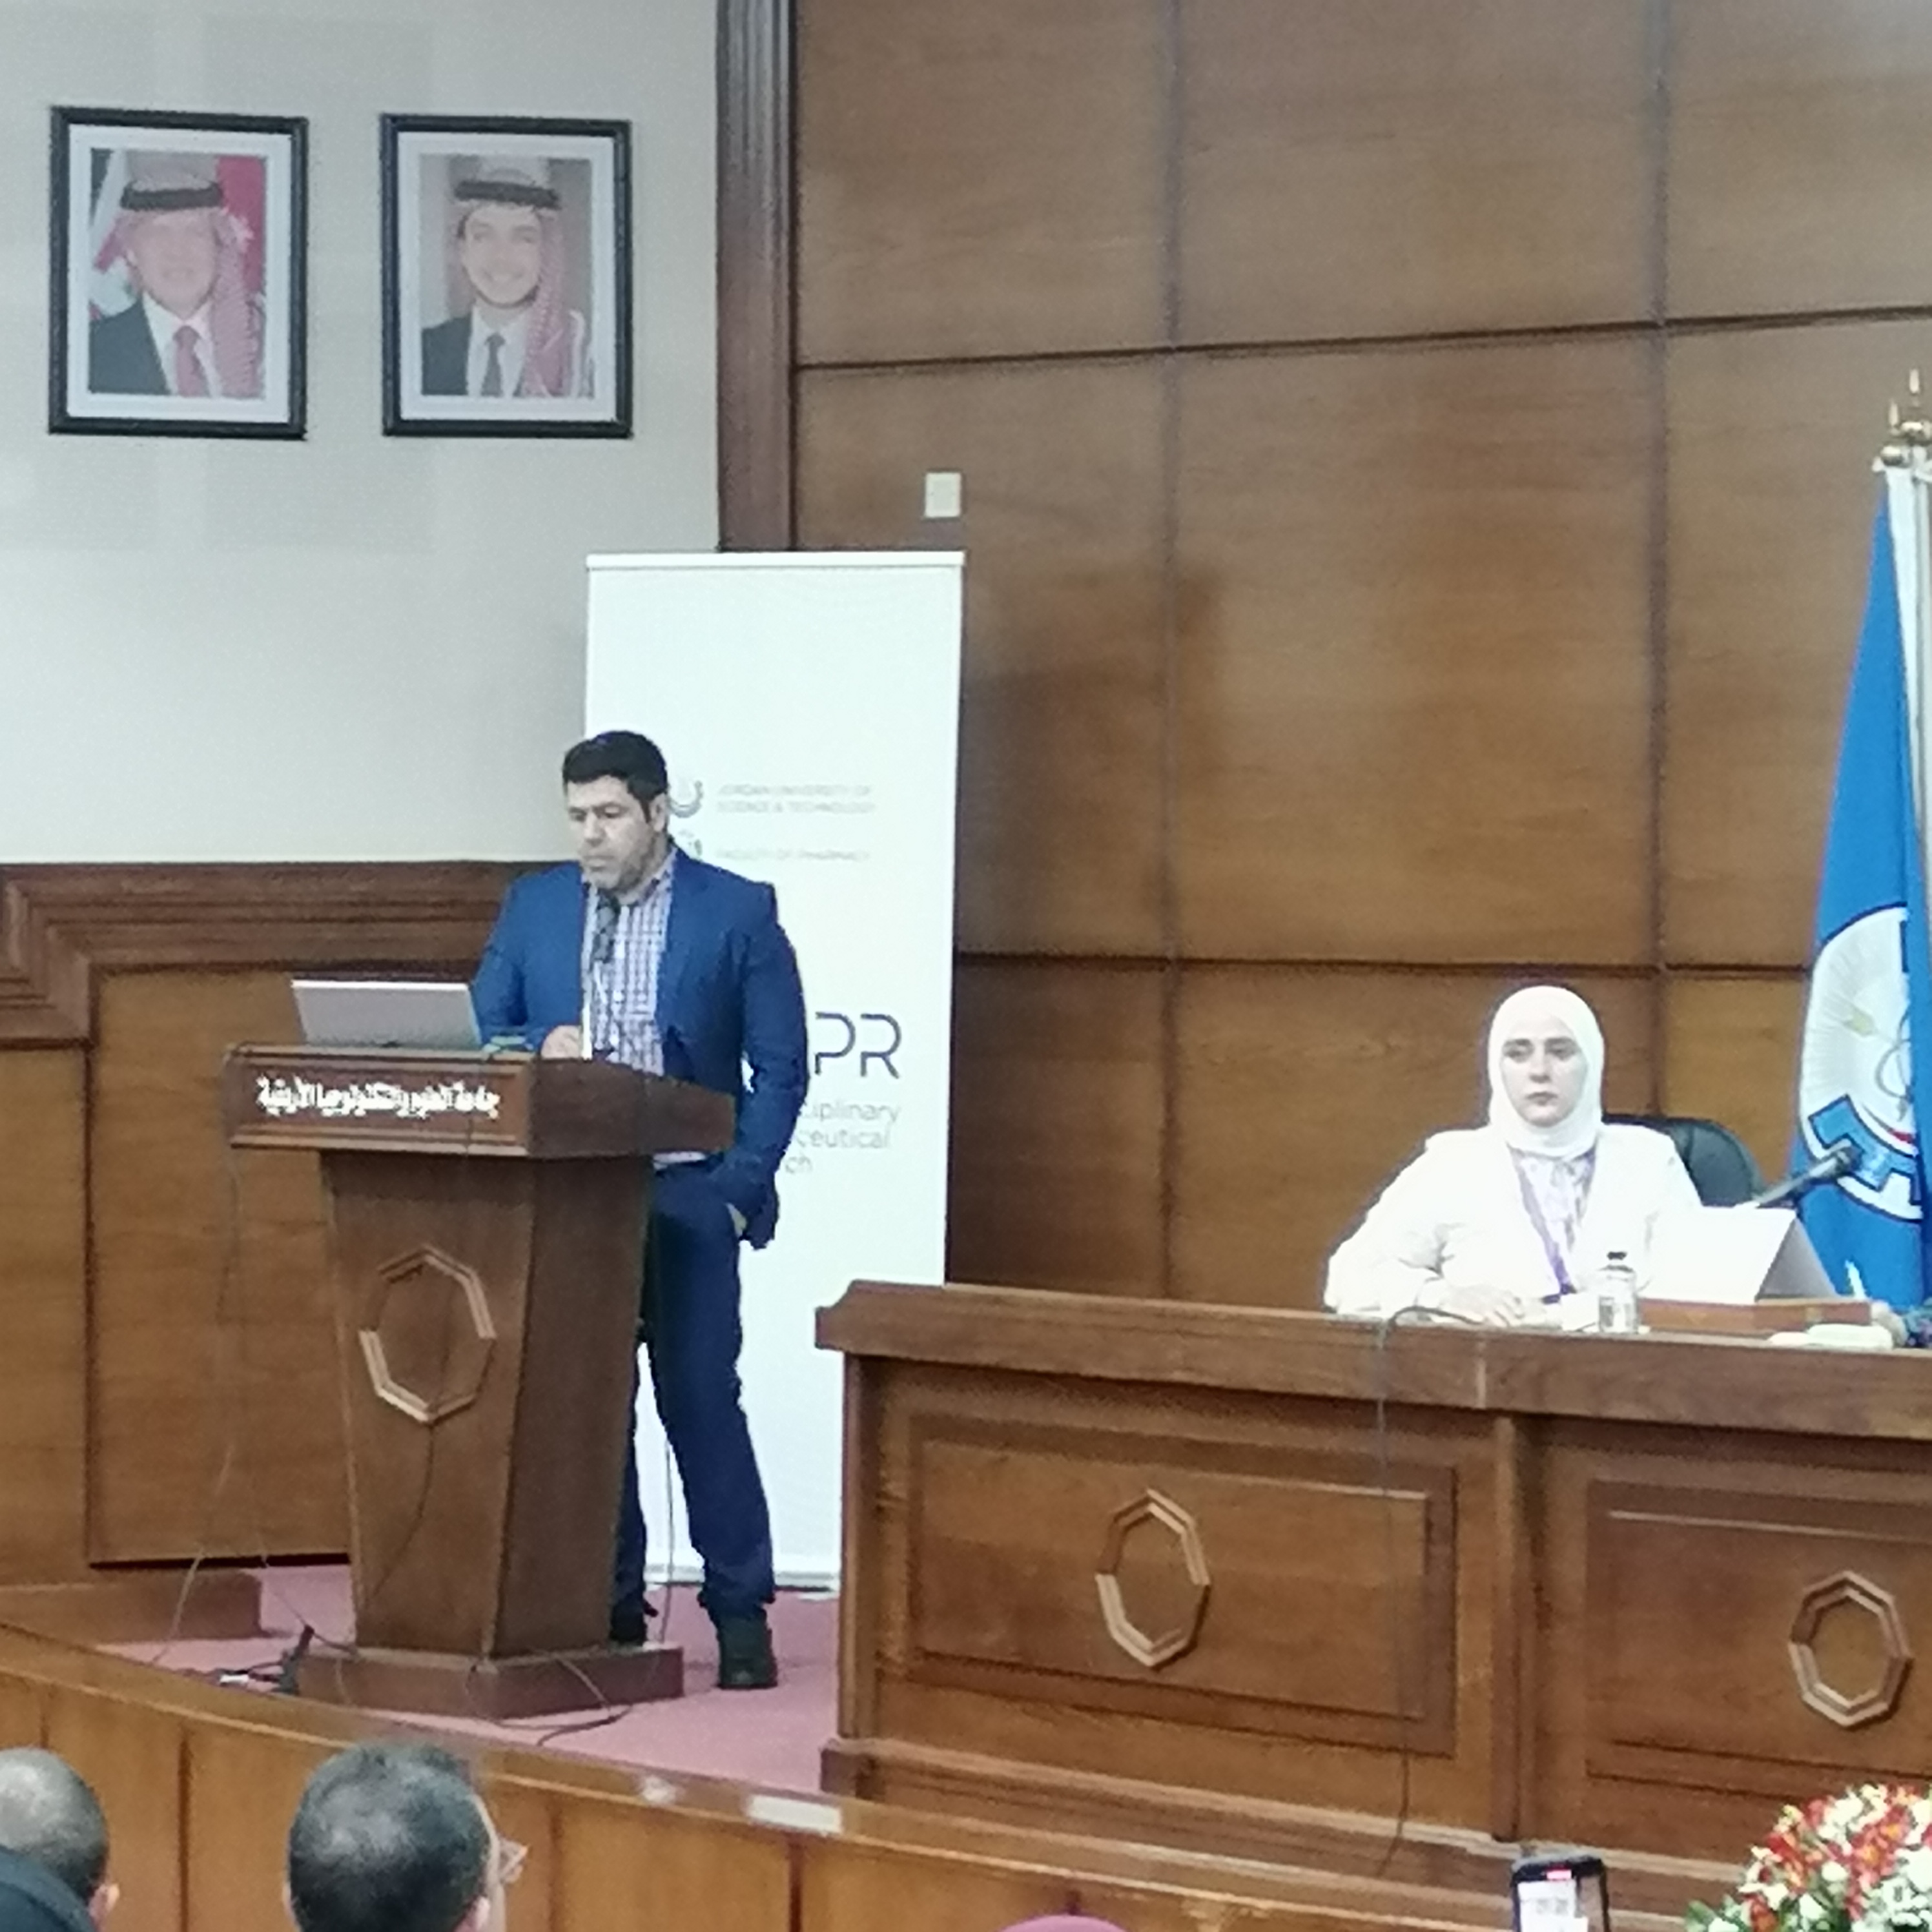 The Fifth International Conference of the Faculty of Pharmacy \ University of Science and Technology